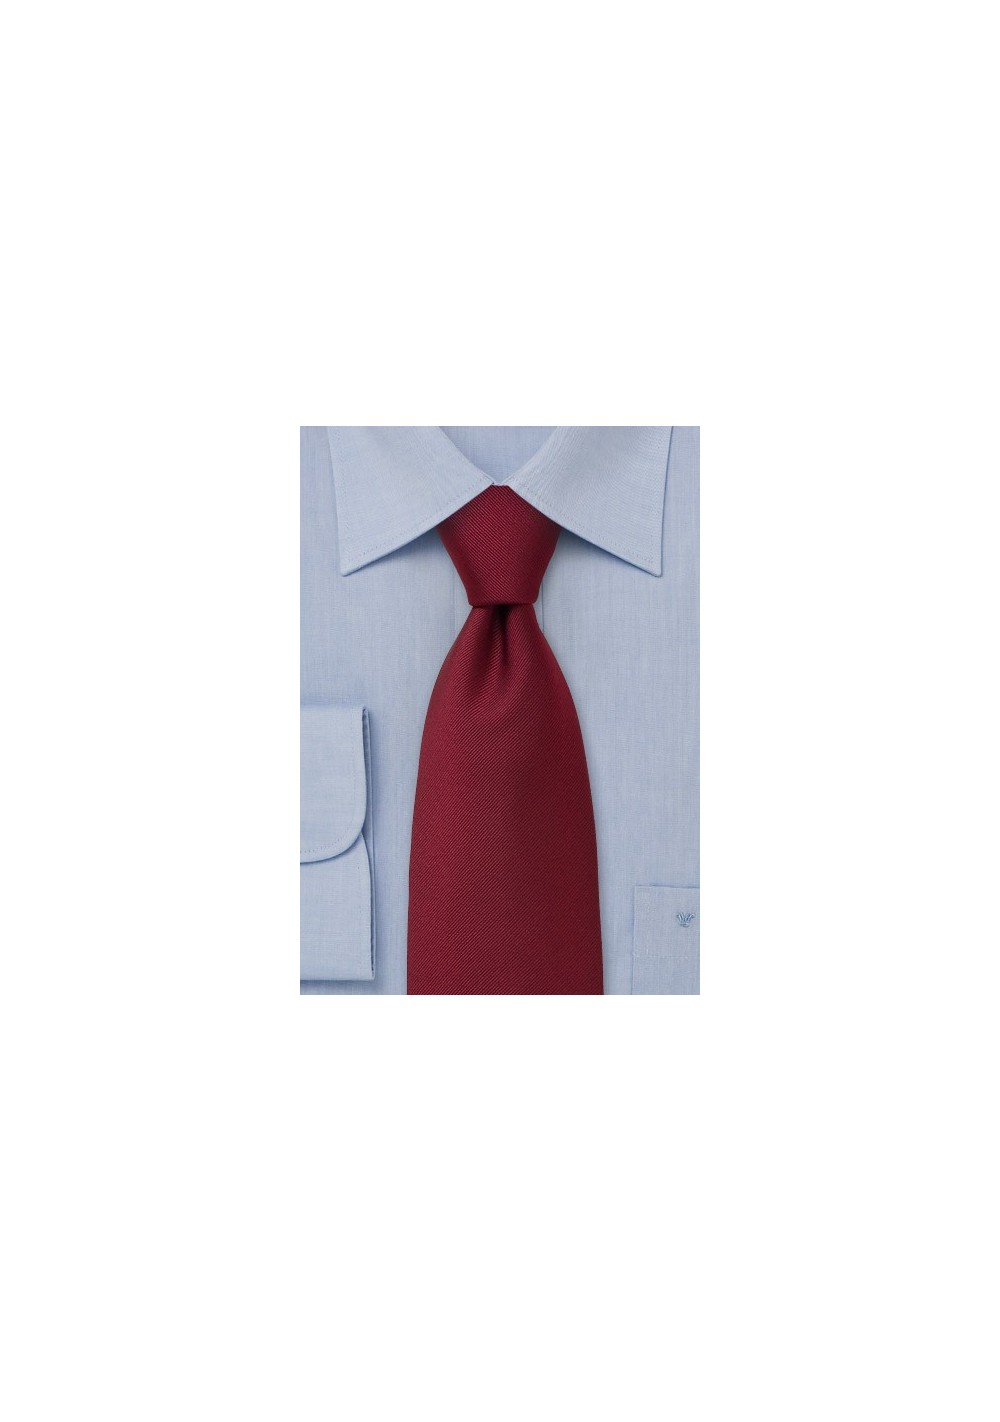 Solid color dark red tie  -  Burgundy red with fine ripped diagonal striping pattern